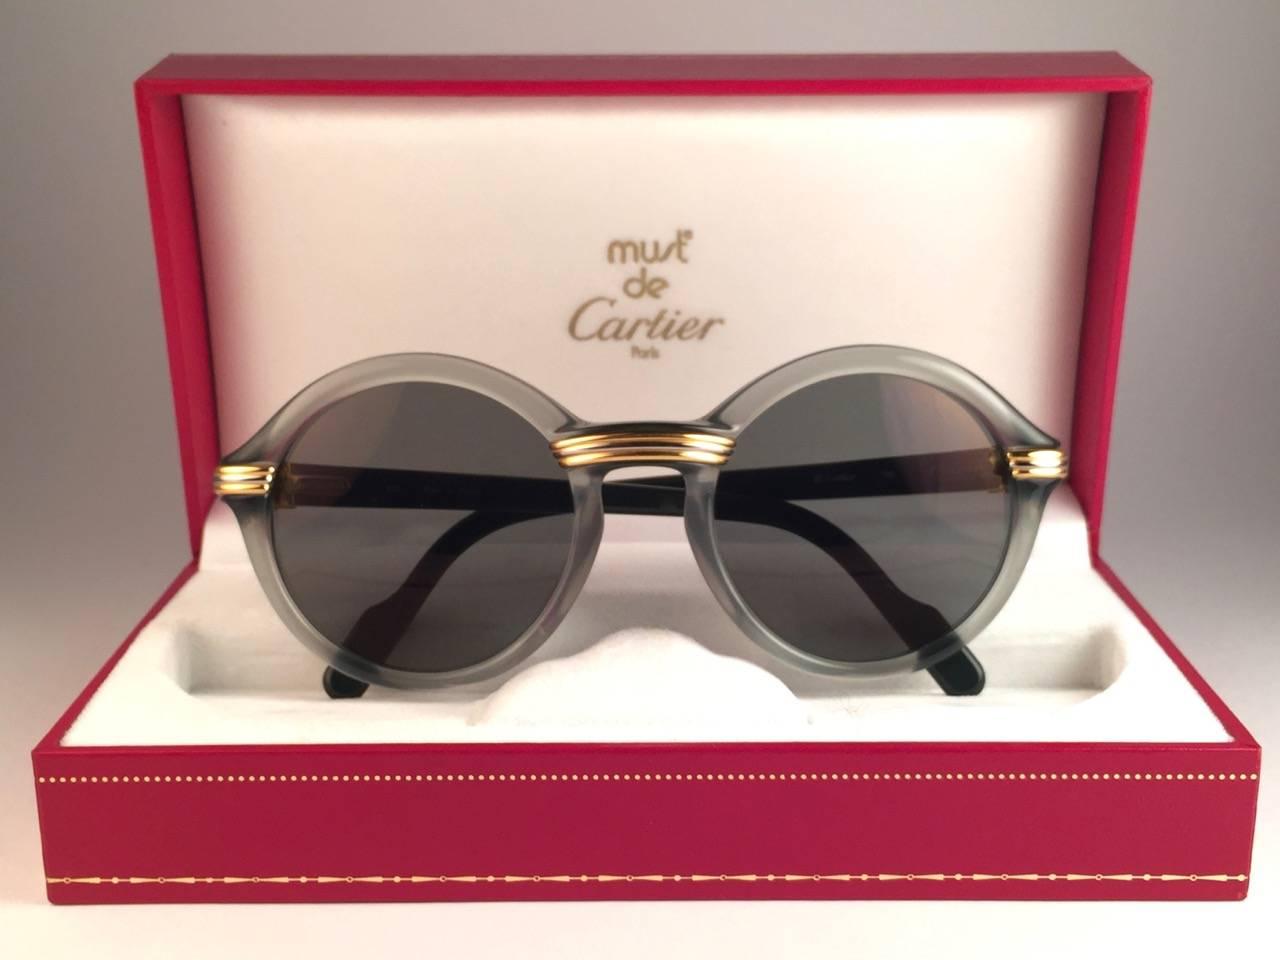 New 1991 Original Cartier Cabriolet Art Deco Translucent Jade sunglasses with grey ( uv protection ) lenses.
Frame has the famous real gold and white gold accents in the middle and on the sides. 
All hallmarks. Cartier gold signs on the earpaddles.